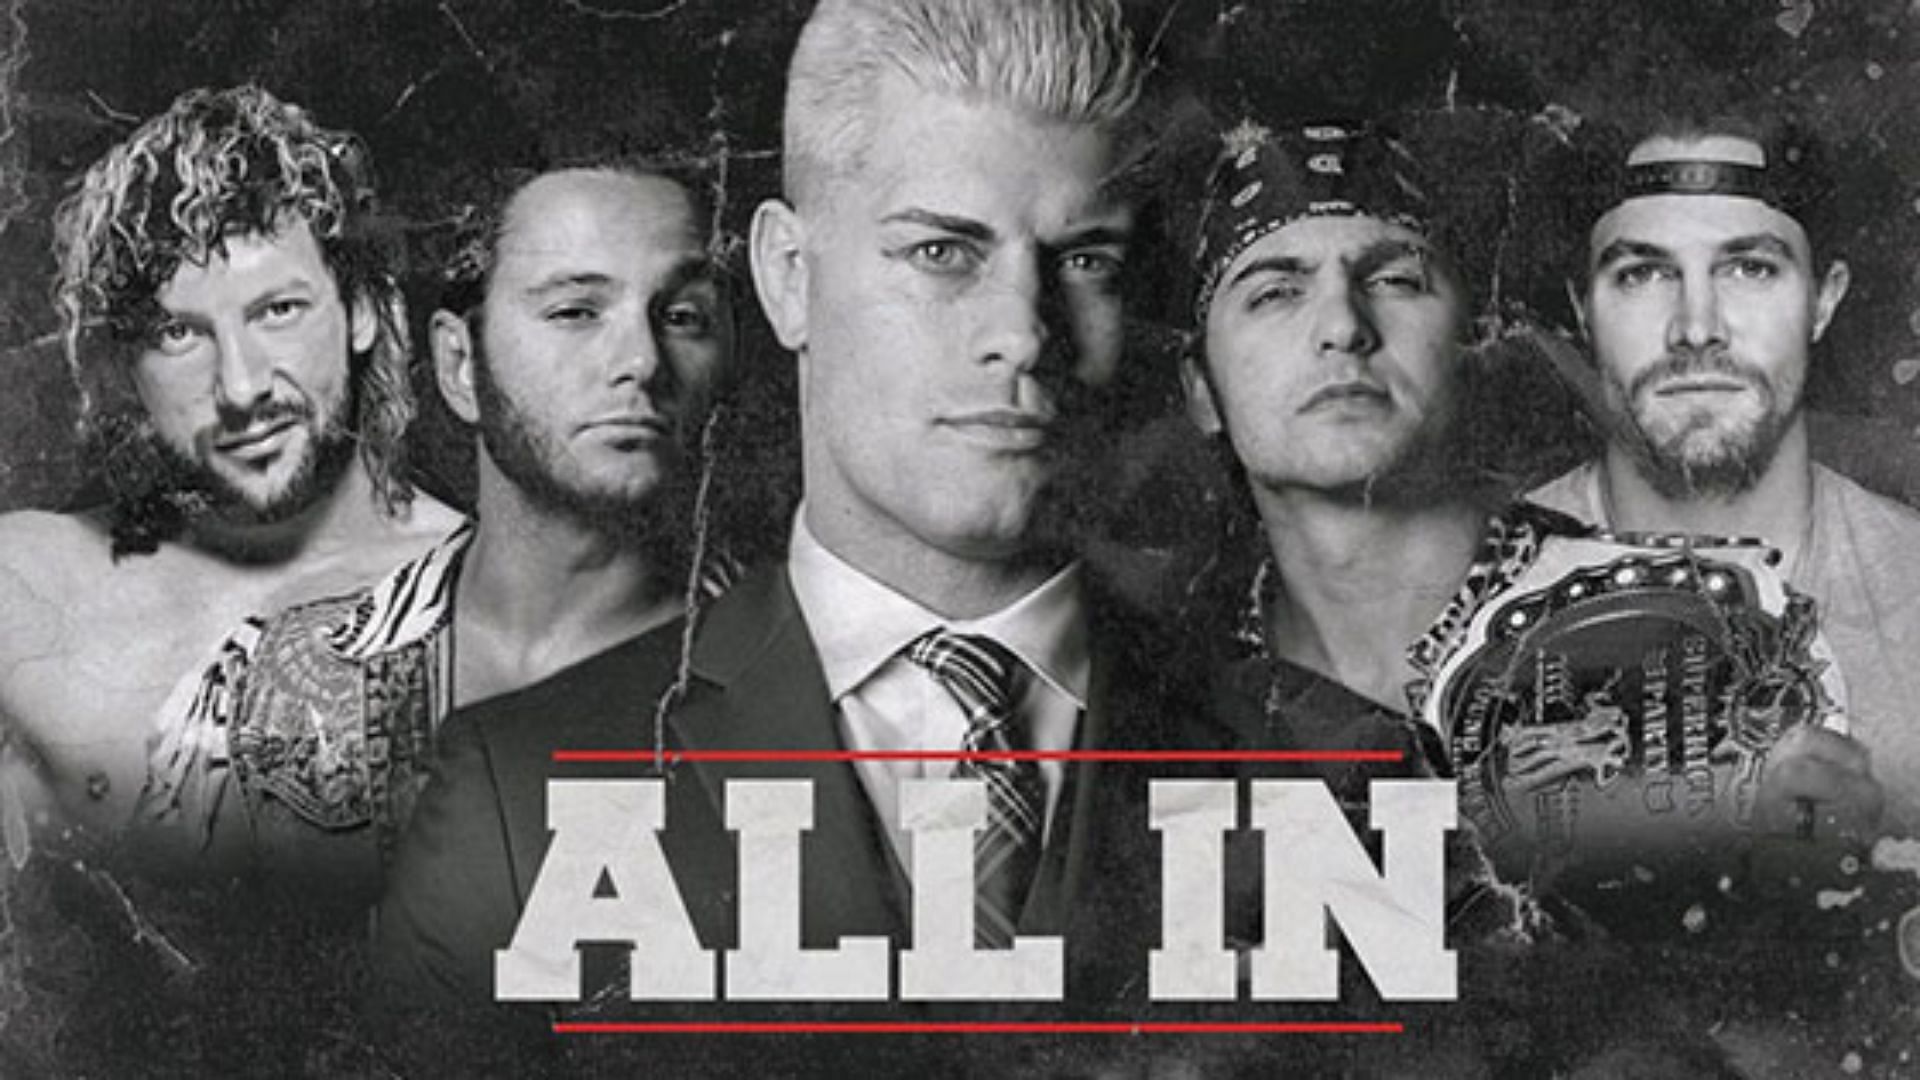 All In 2018 was an independent pro wrestling PPV  promoted by Cody Rhodes and The Young Bucks